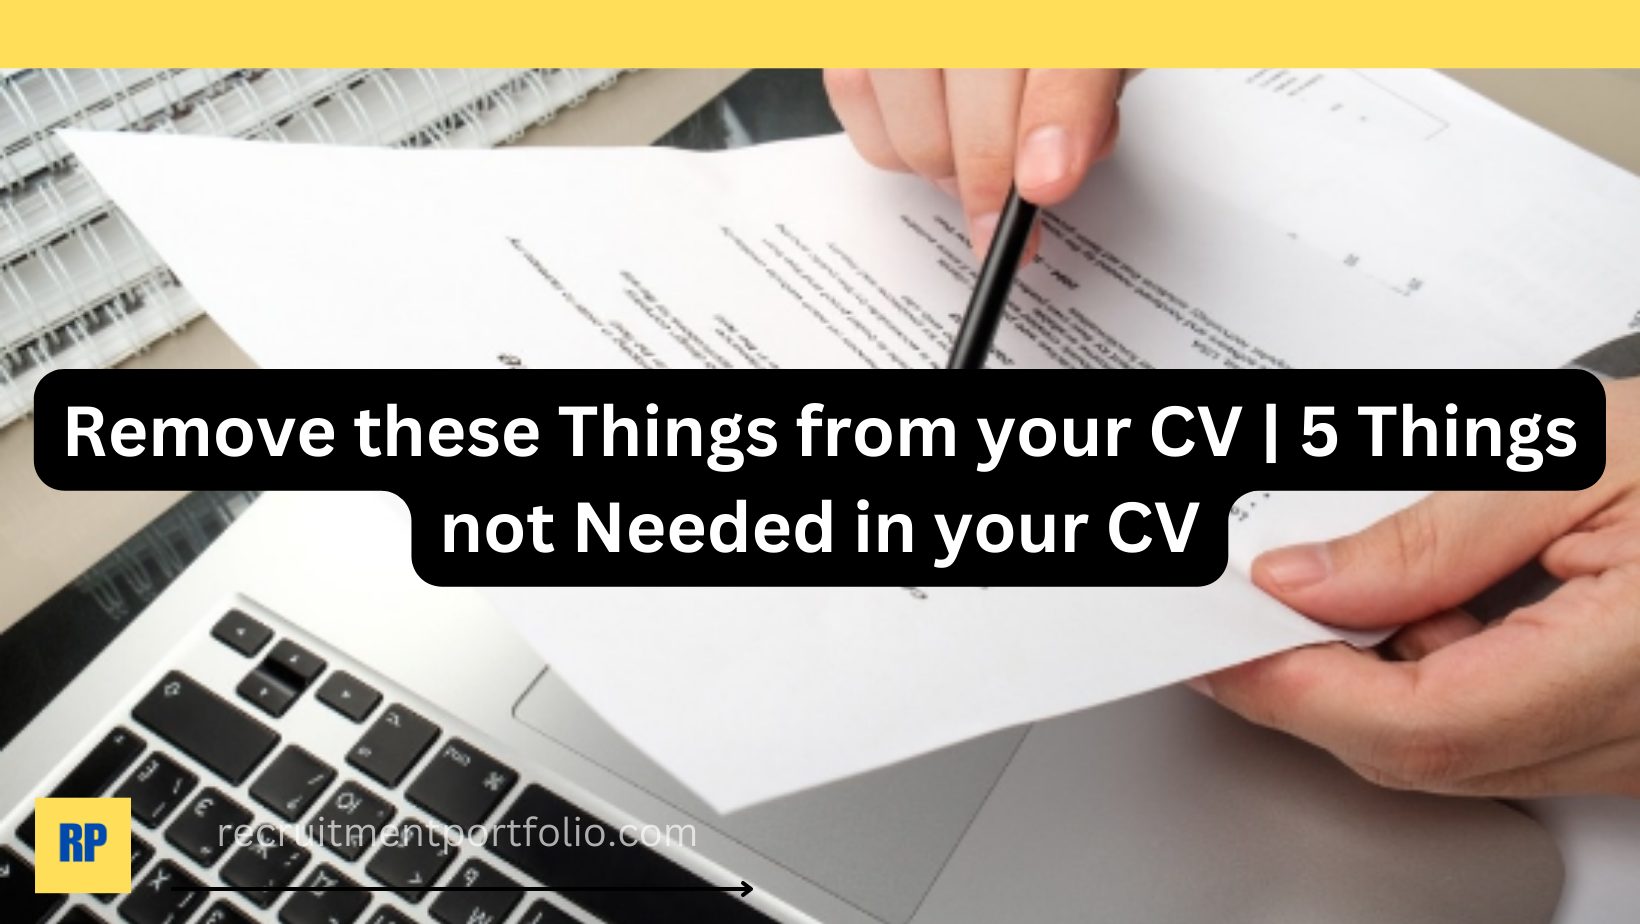 Things not Needed in your CV